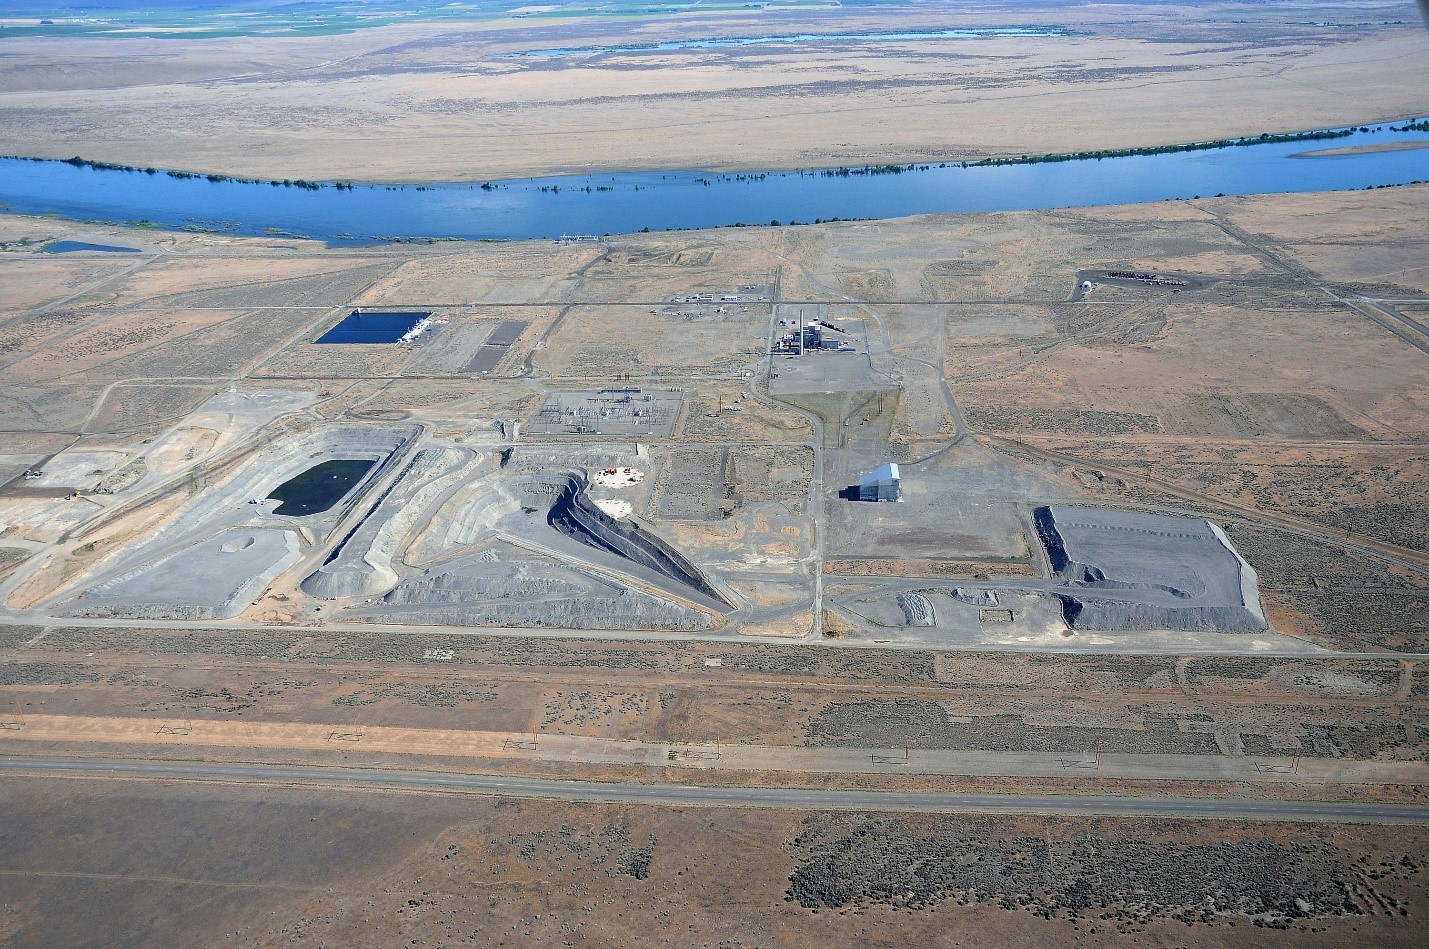 Photo: 100-C-7 Soil Site Hexavalent Chromium Dig with B Reactor shown in the upper right corner and Columbia River across the top  